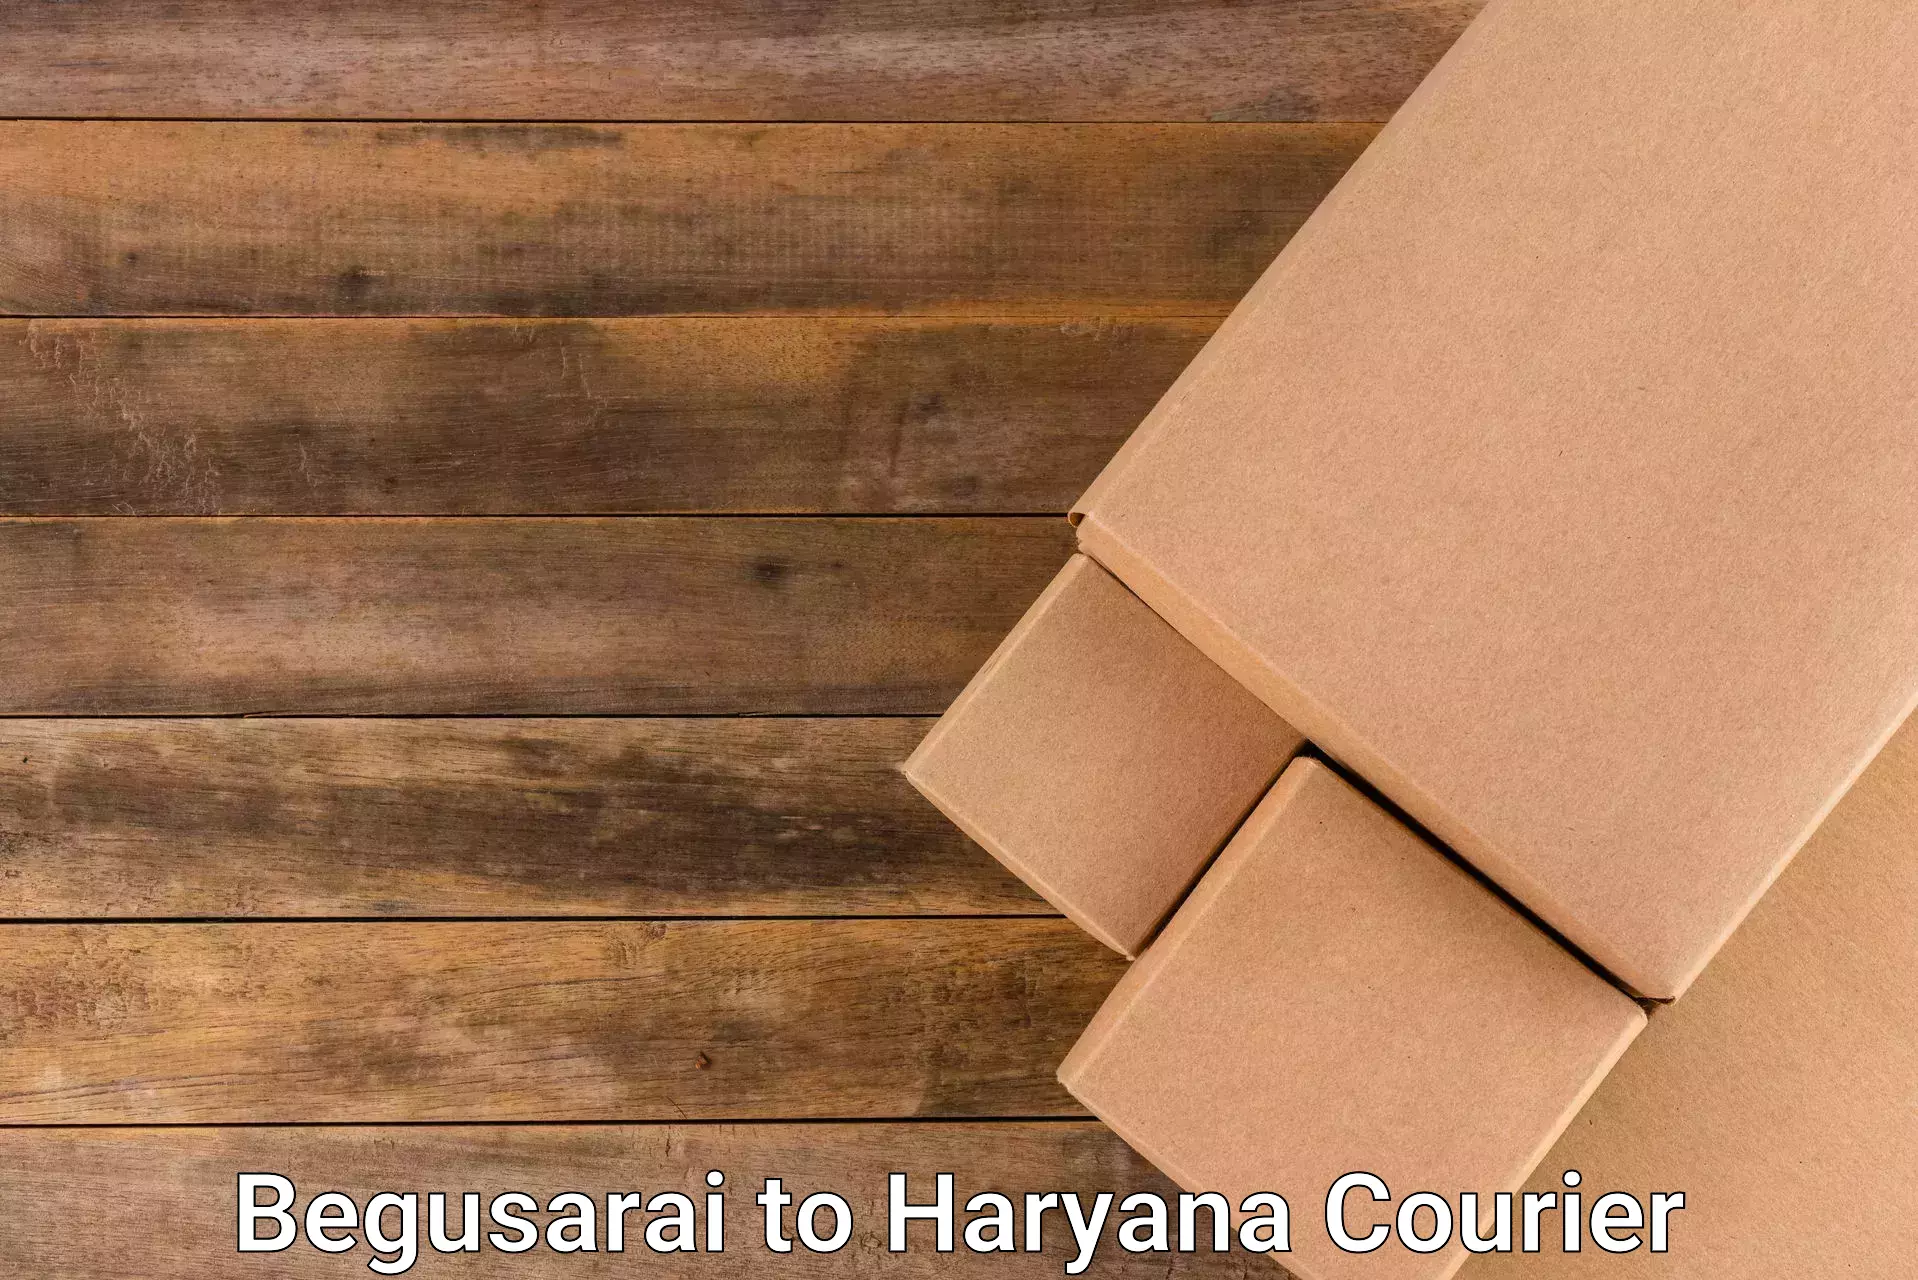 Flexible delivery scheduling Begusarai to Faridabad